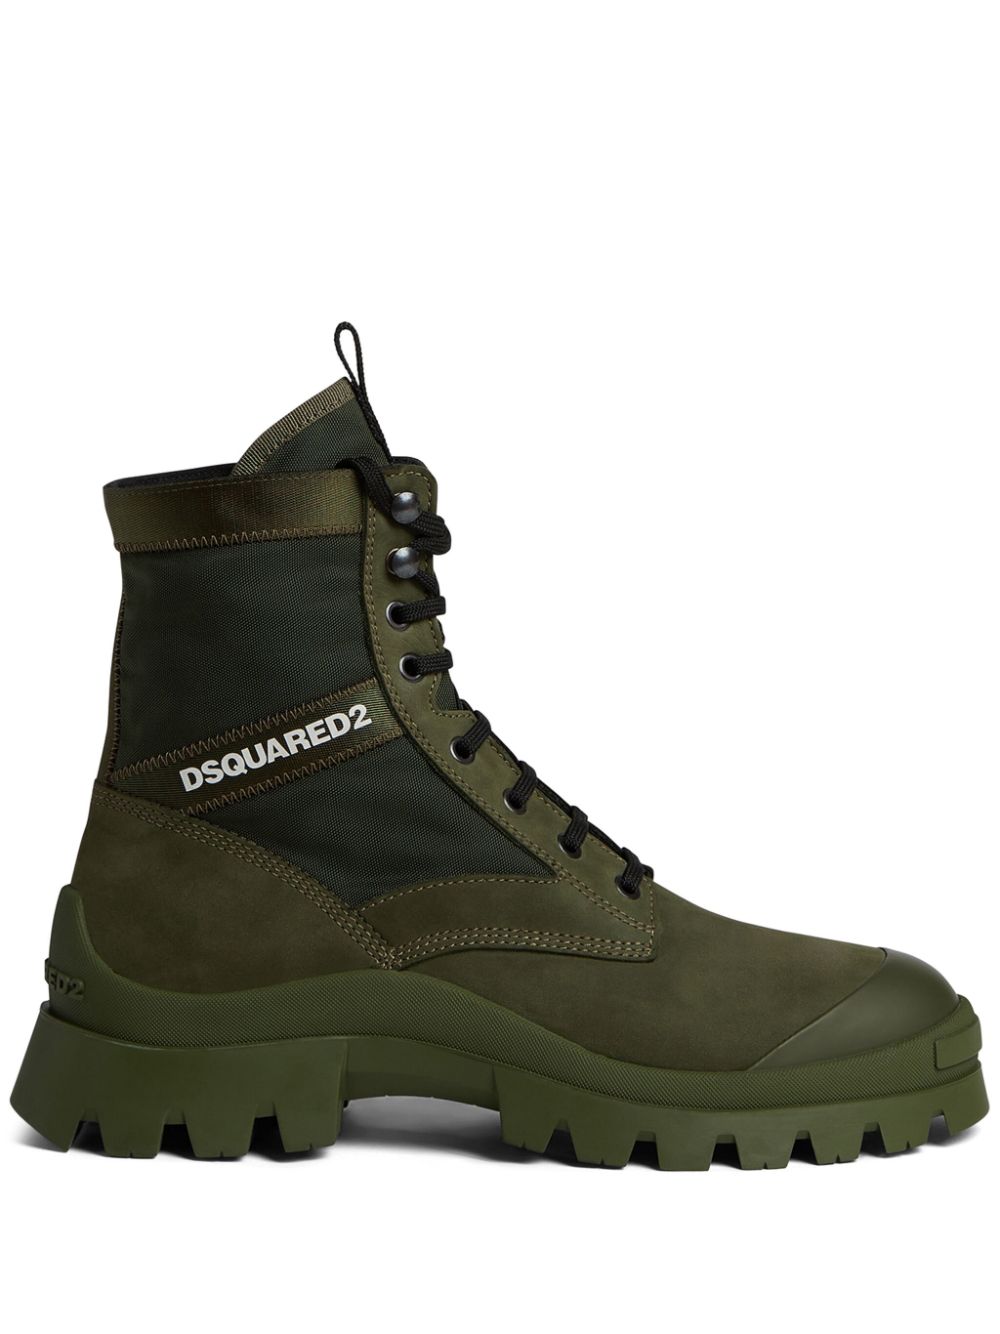 DSQUARED2 logo-print leather boots - Green von DSQUARED2